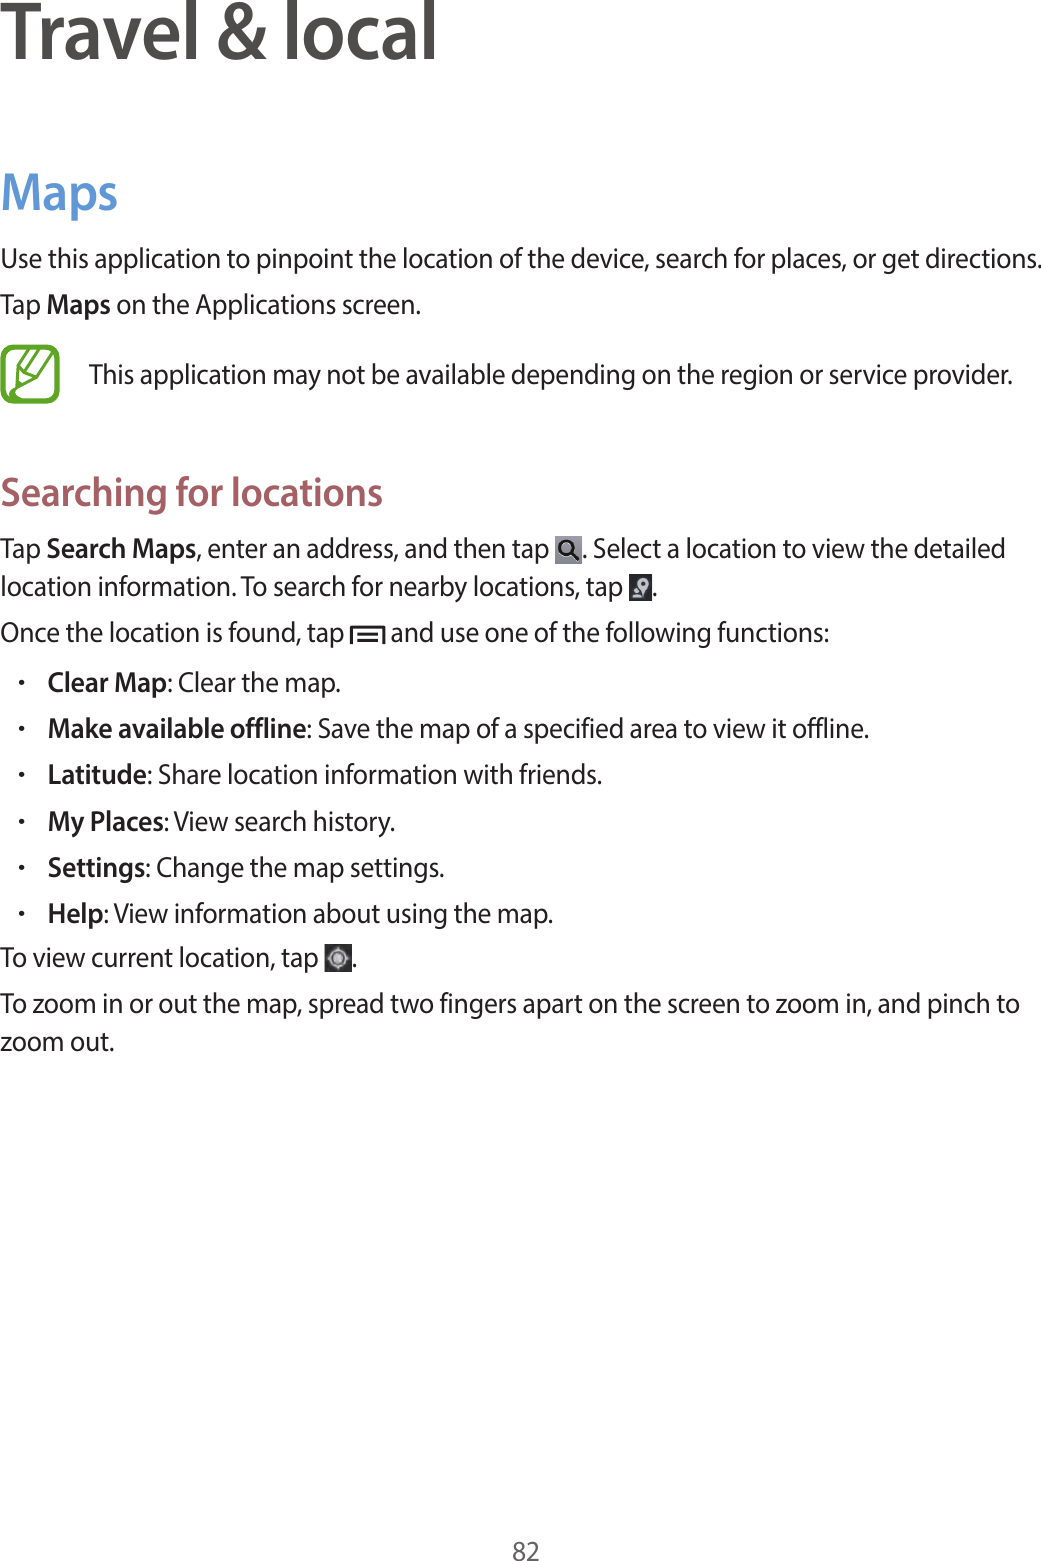 82Travel &amp; localMapsUse this application to pinpoint the location of the device, search for places, or get directions.Tap Maps on the Applications screen.This application may not be available depending on the region or service provider.Searching for locationsTap Search Maps, enter an address, and then tap  . Select a location to view the detailed location information. To search for nearby locations, tap  .Once the location is found, tap   and use one of the following functions:•Clear Map: Clear the map.•Make available offline: Save the map of a specified area to view it offline.•Latitude: Share location information with friends.•My Places: View search history.•Settings: Change the map settings.•Help: View information about using the map.To view current location, tap  .To zoom in or out the map, spread two fingers apart on the screen to zoom in, and pinch to zoom out.